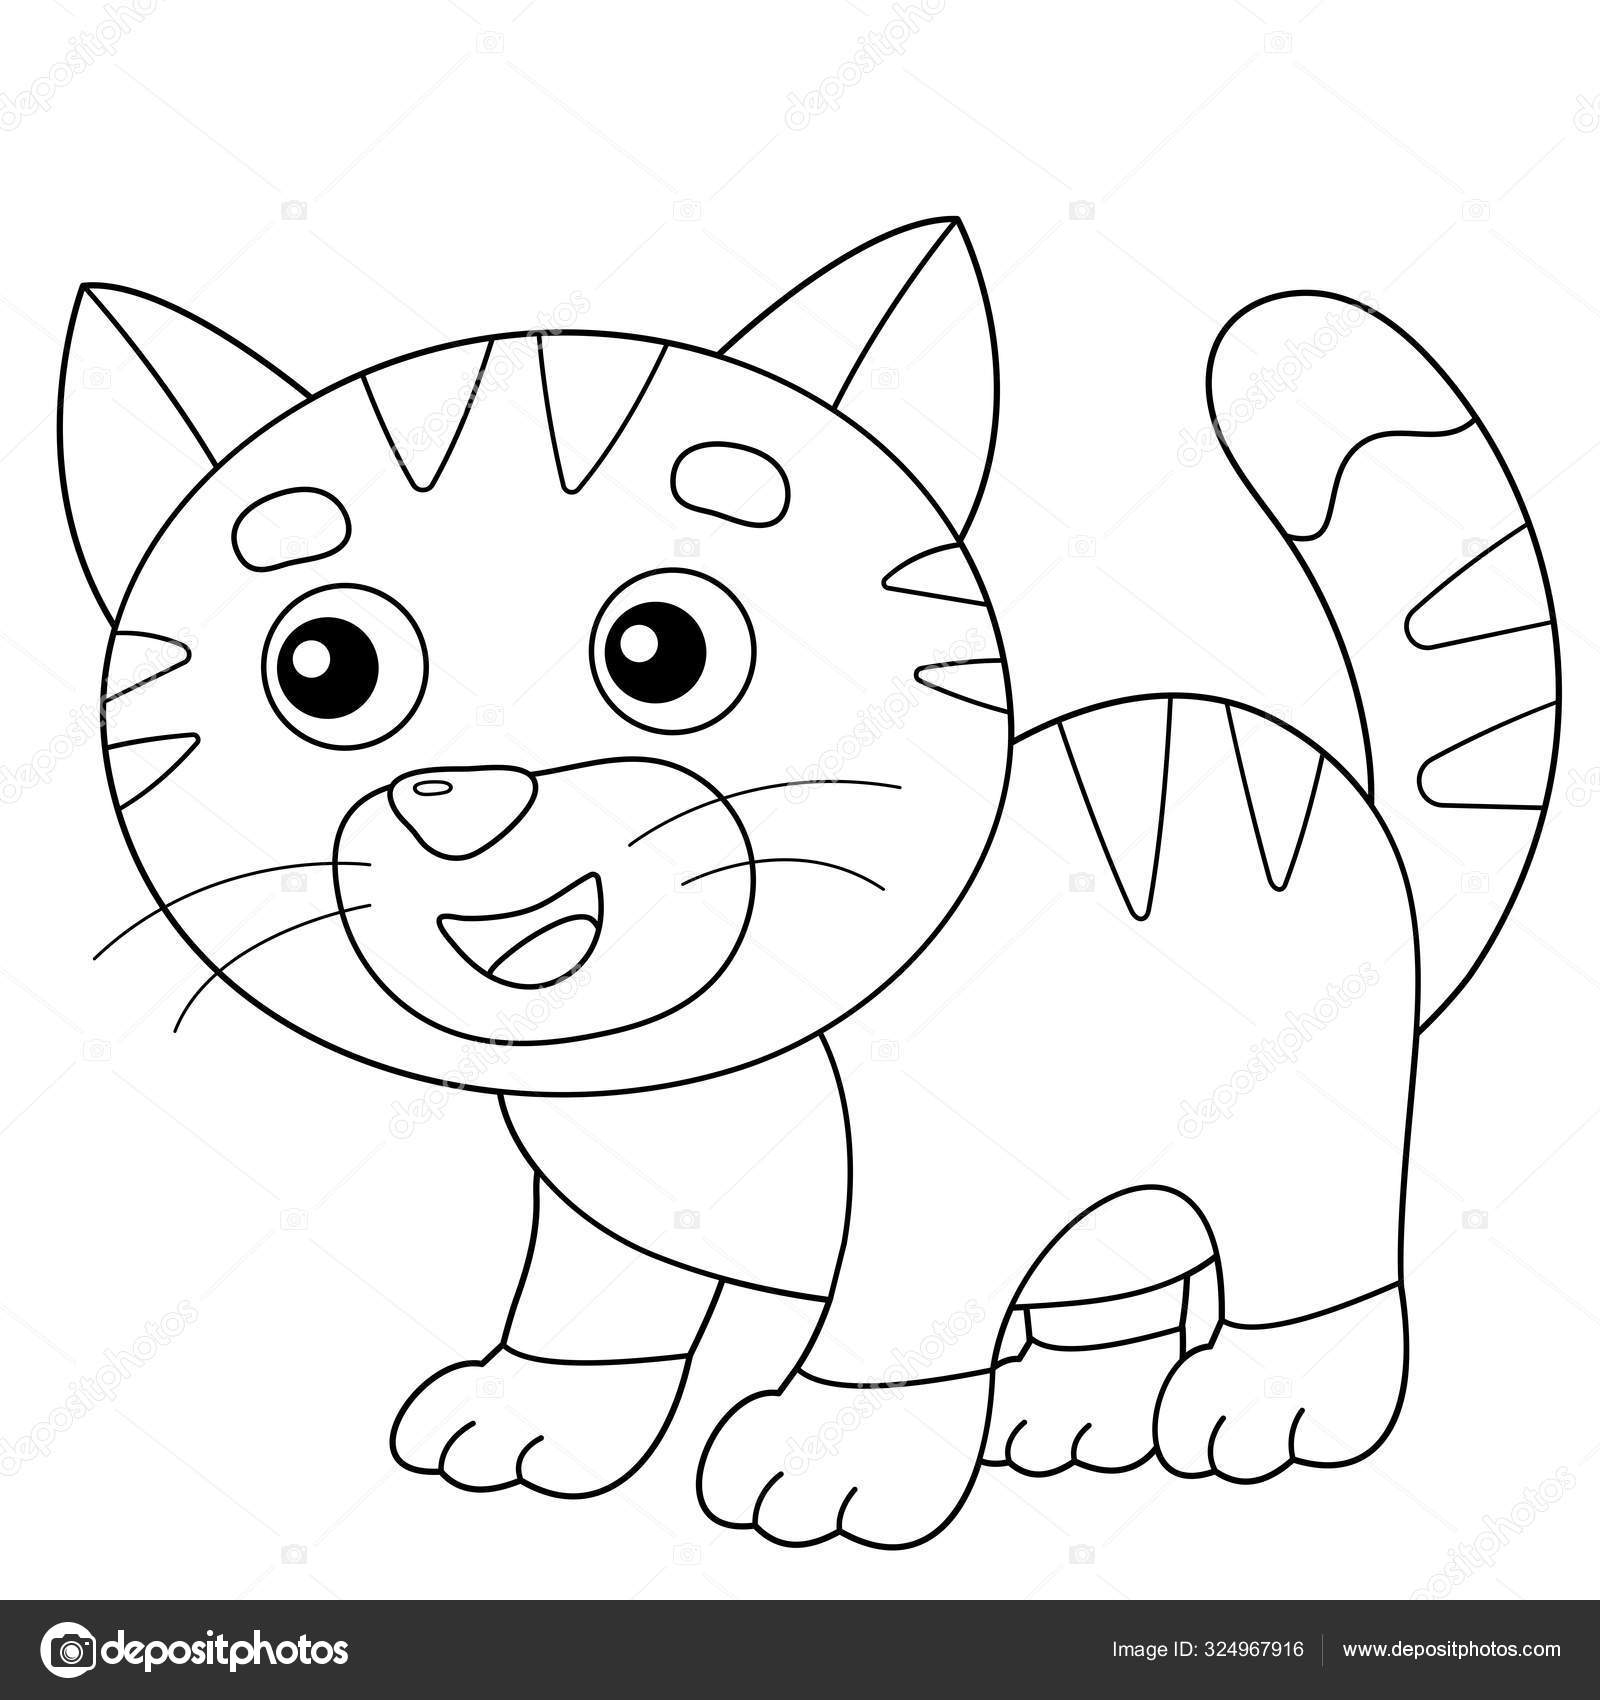 Coloring Page Outline of cartoon kitten. Pets. Coloring book for ...